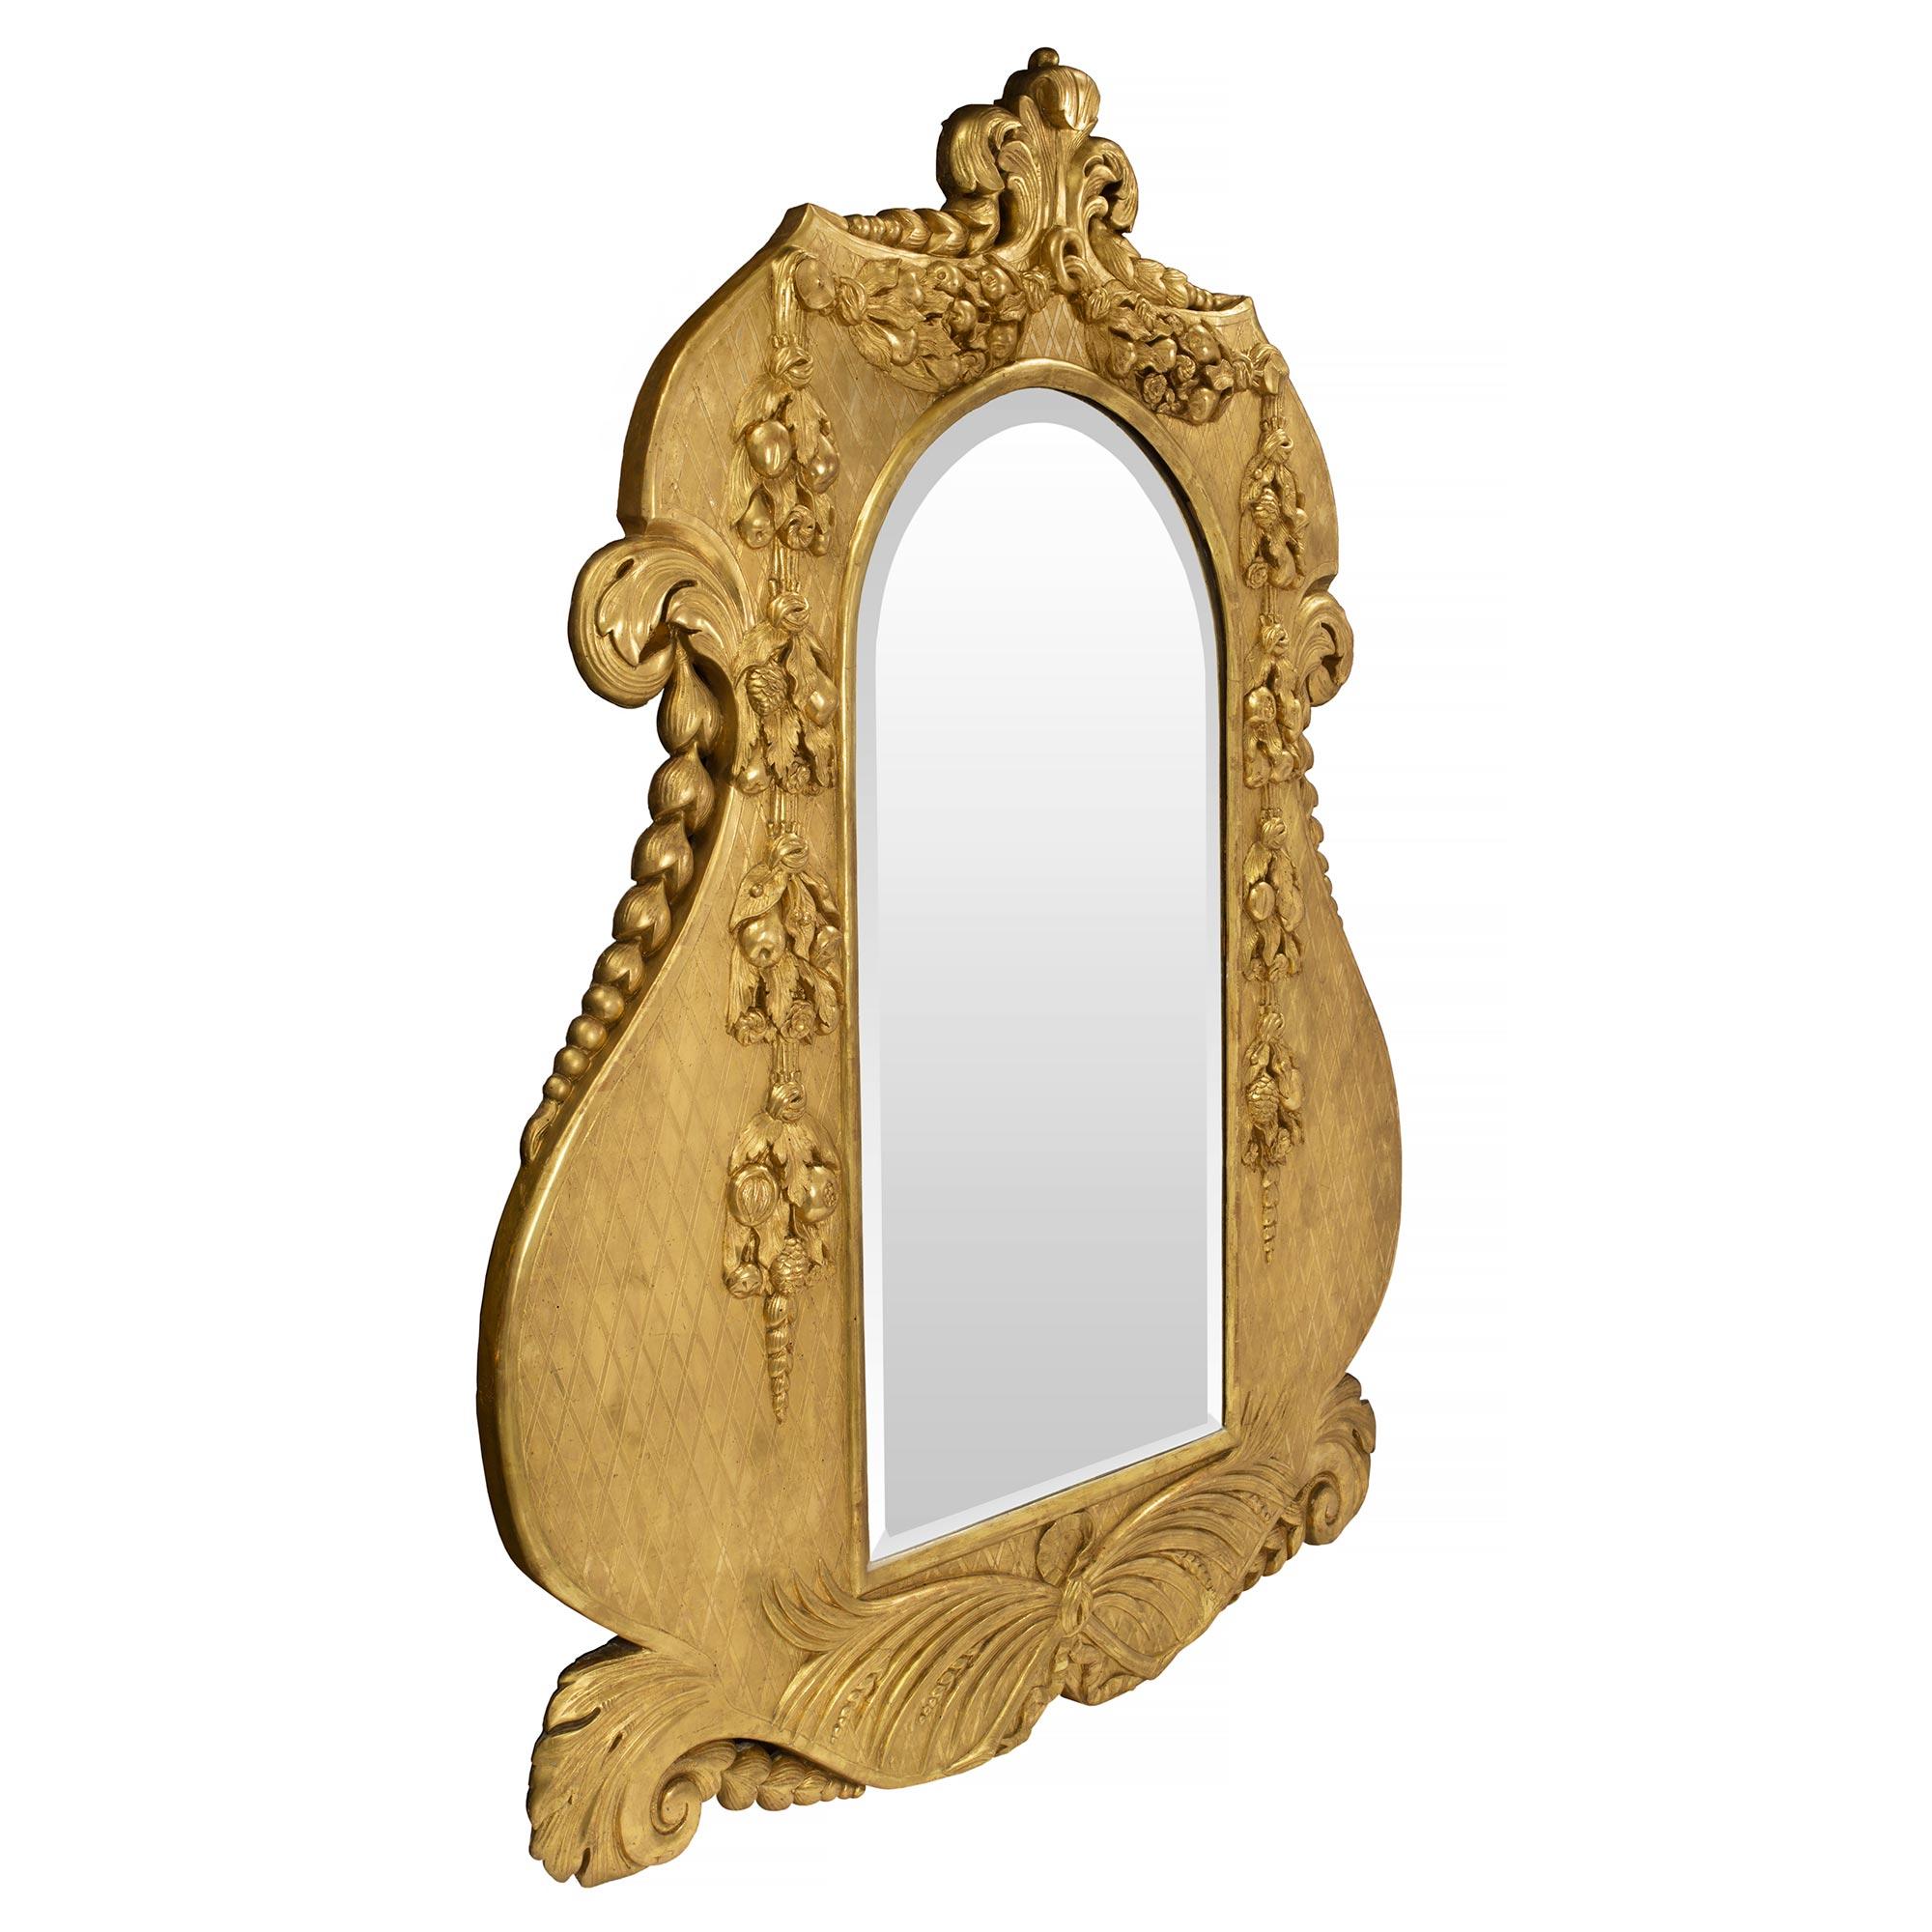 A stunning and very unique Italian 19th century Louis XV / Louis XVI st. giltwood mirror. The original beveled mirror plate is framed within a charming and unusually shaped giltwood border. The border displays a beautiful scrolled foliate design at